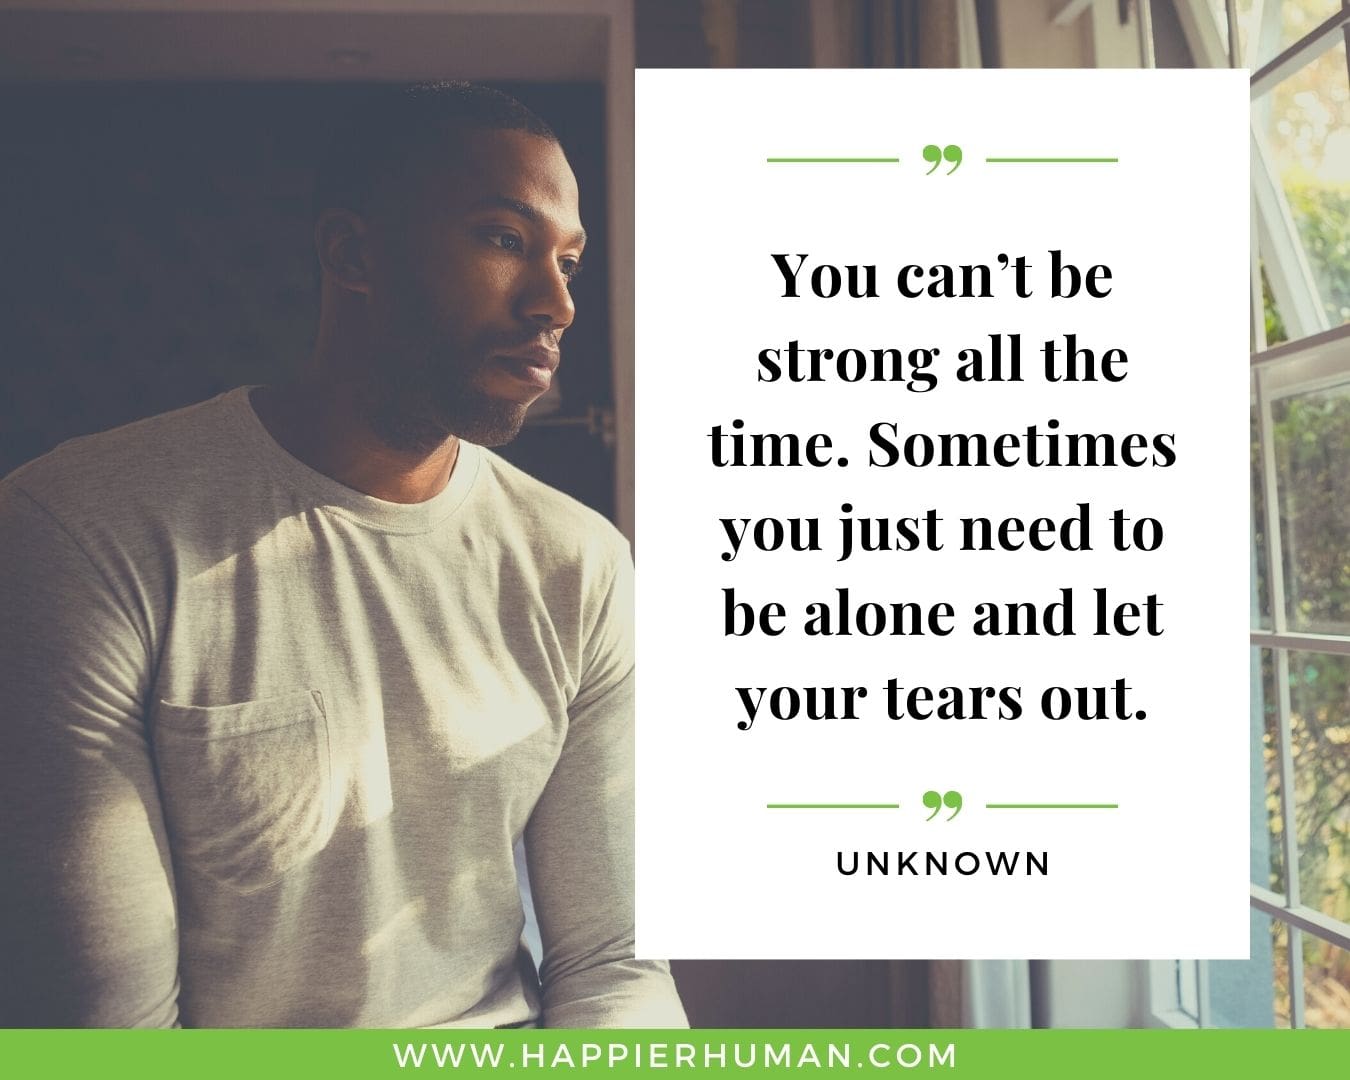 Loneliness Quotes - “You can’t be strong all the time. Sometimes you just need to be alone and let your tears out.”– Unknown